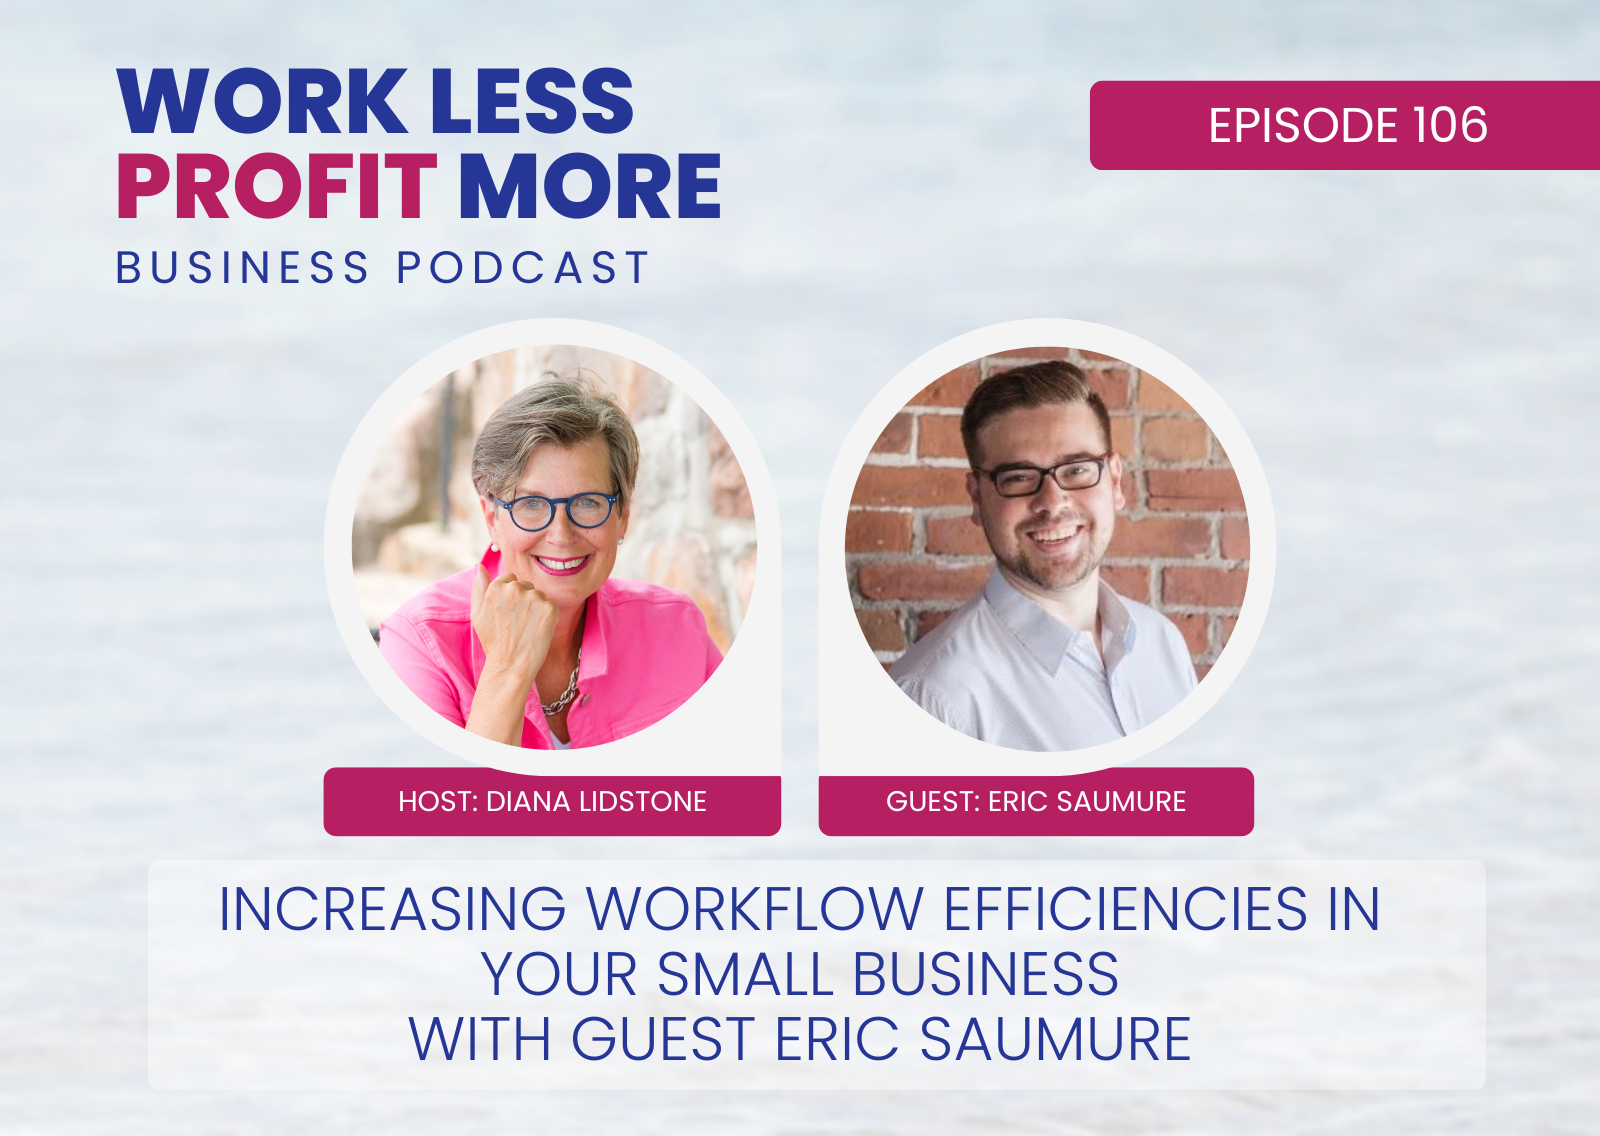 Increasing Workflow Efficiencies in Your Small Business with guest Eric Saumure